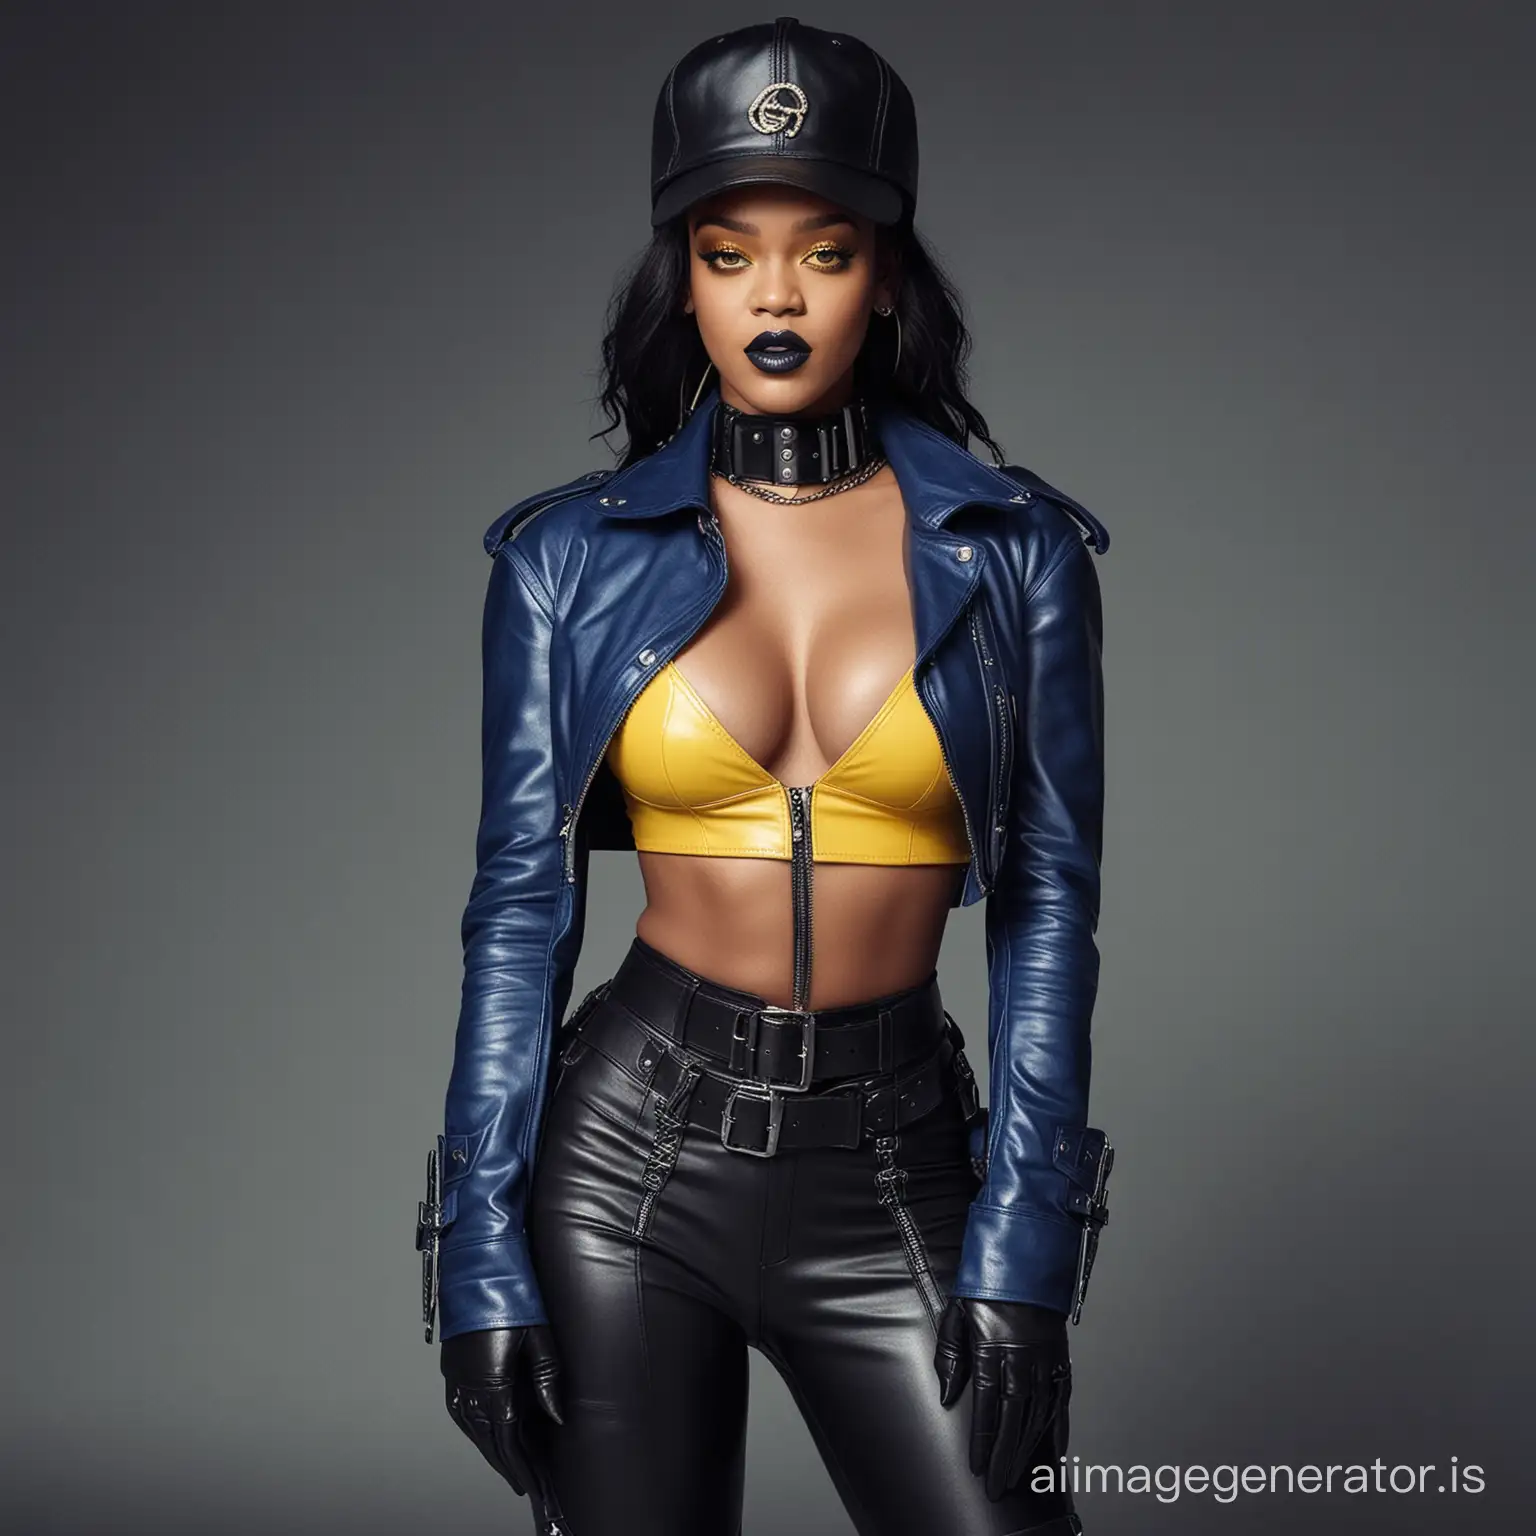 Rihanna-Powerful-Black-Woman-in-Blue-Leather-Straightjacket-and-Boots